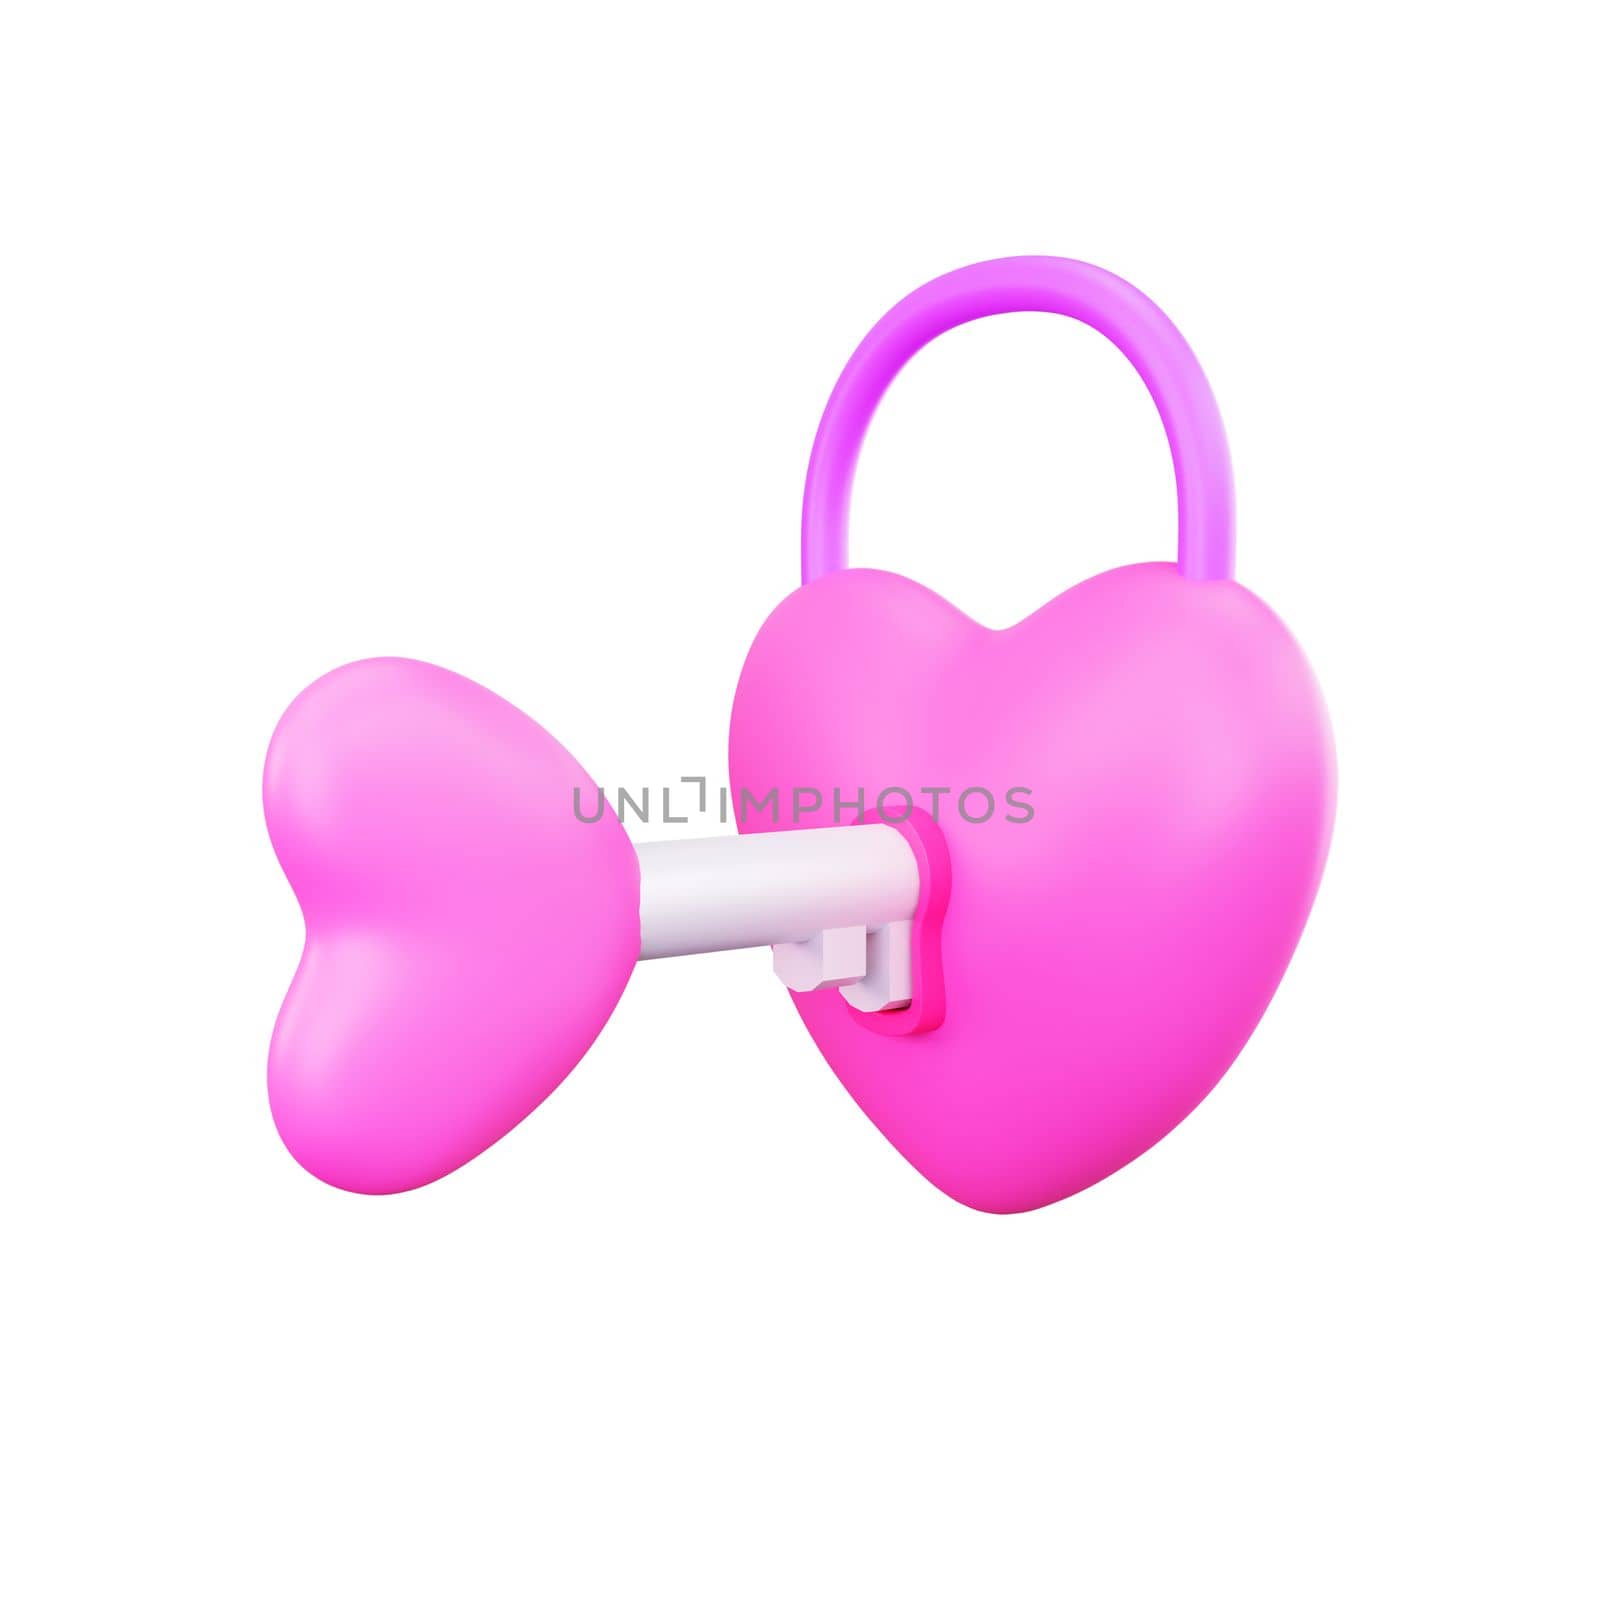 3d rendering of valentine's day lock heart icon